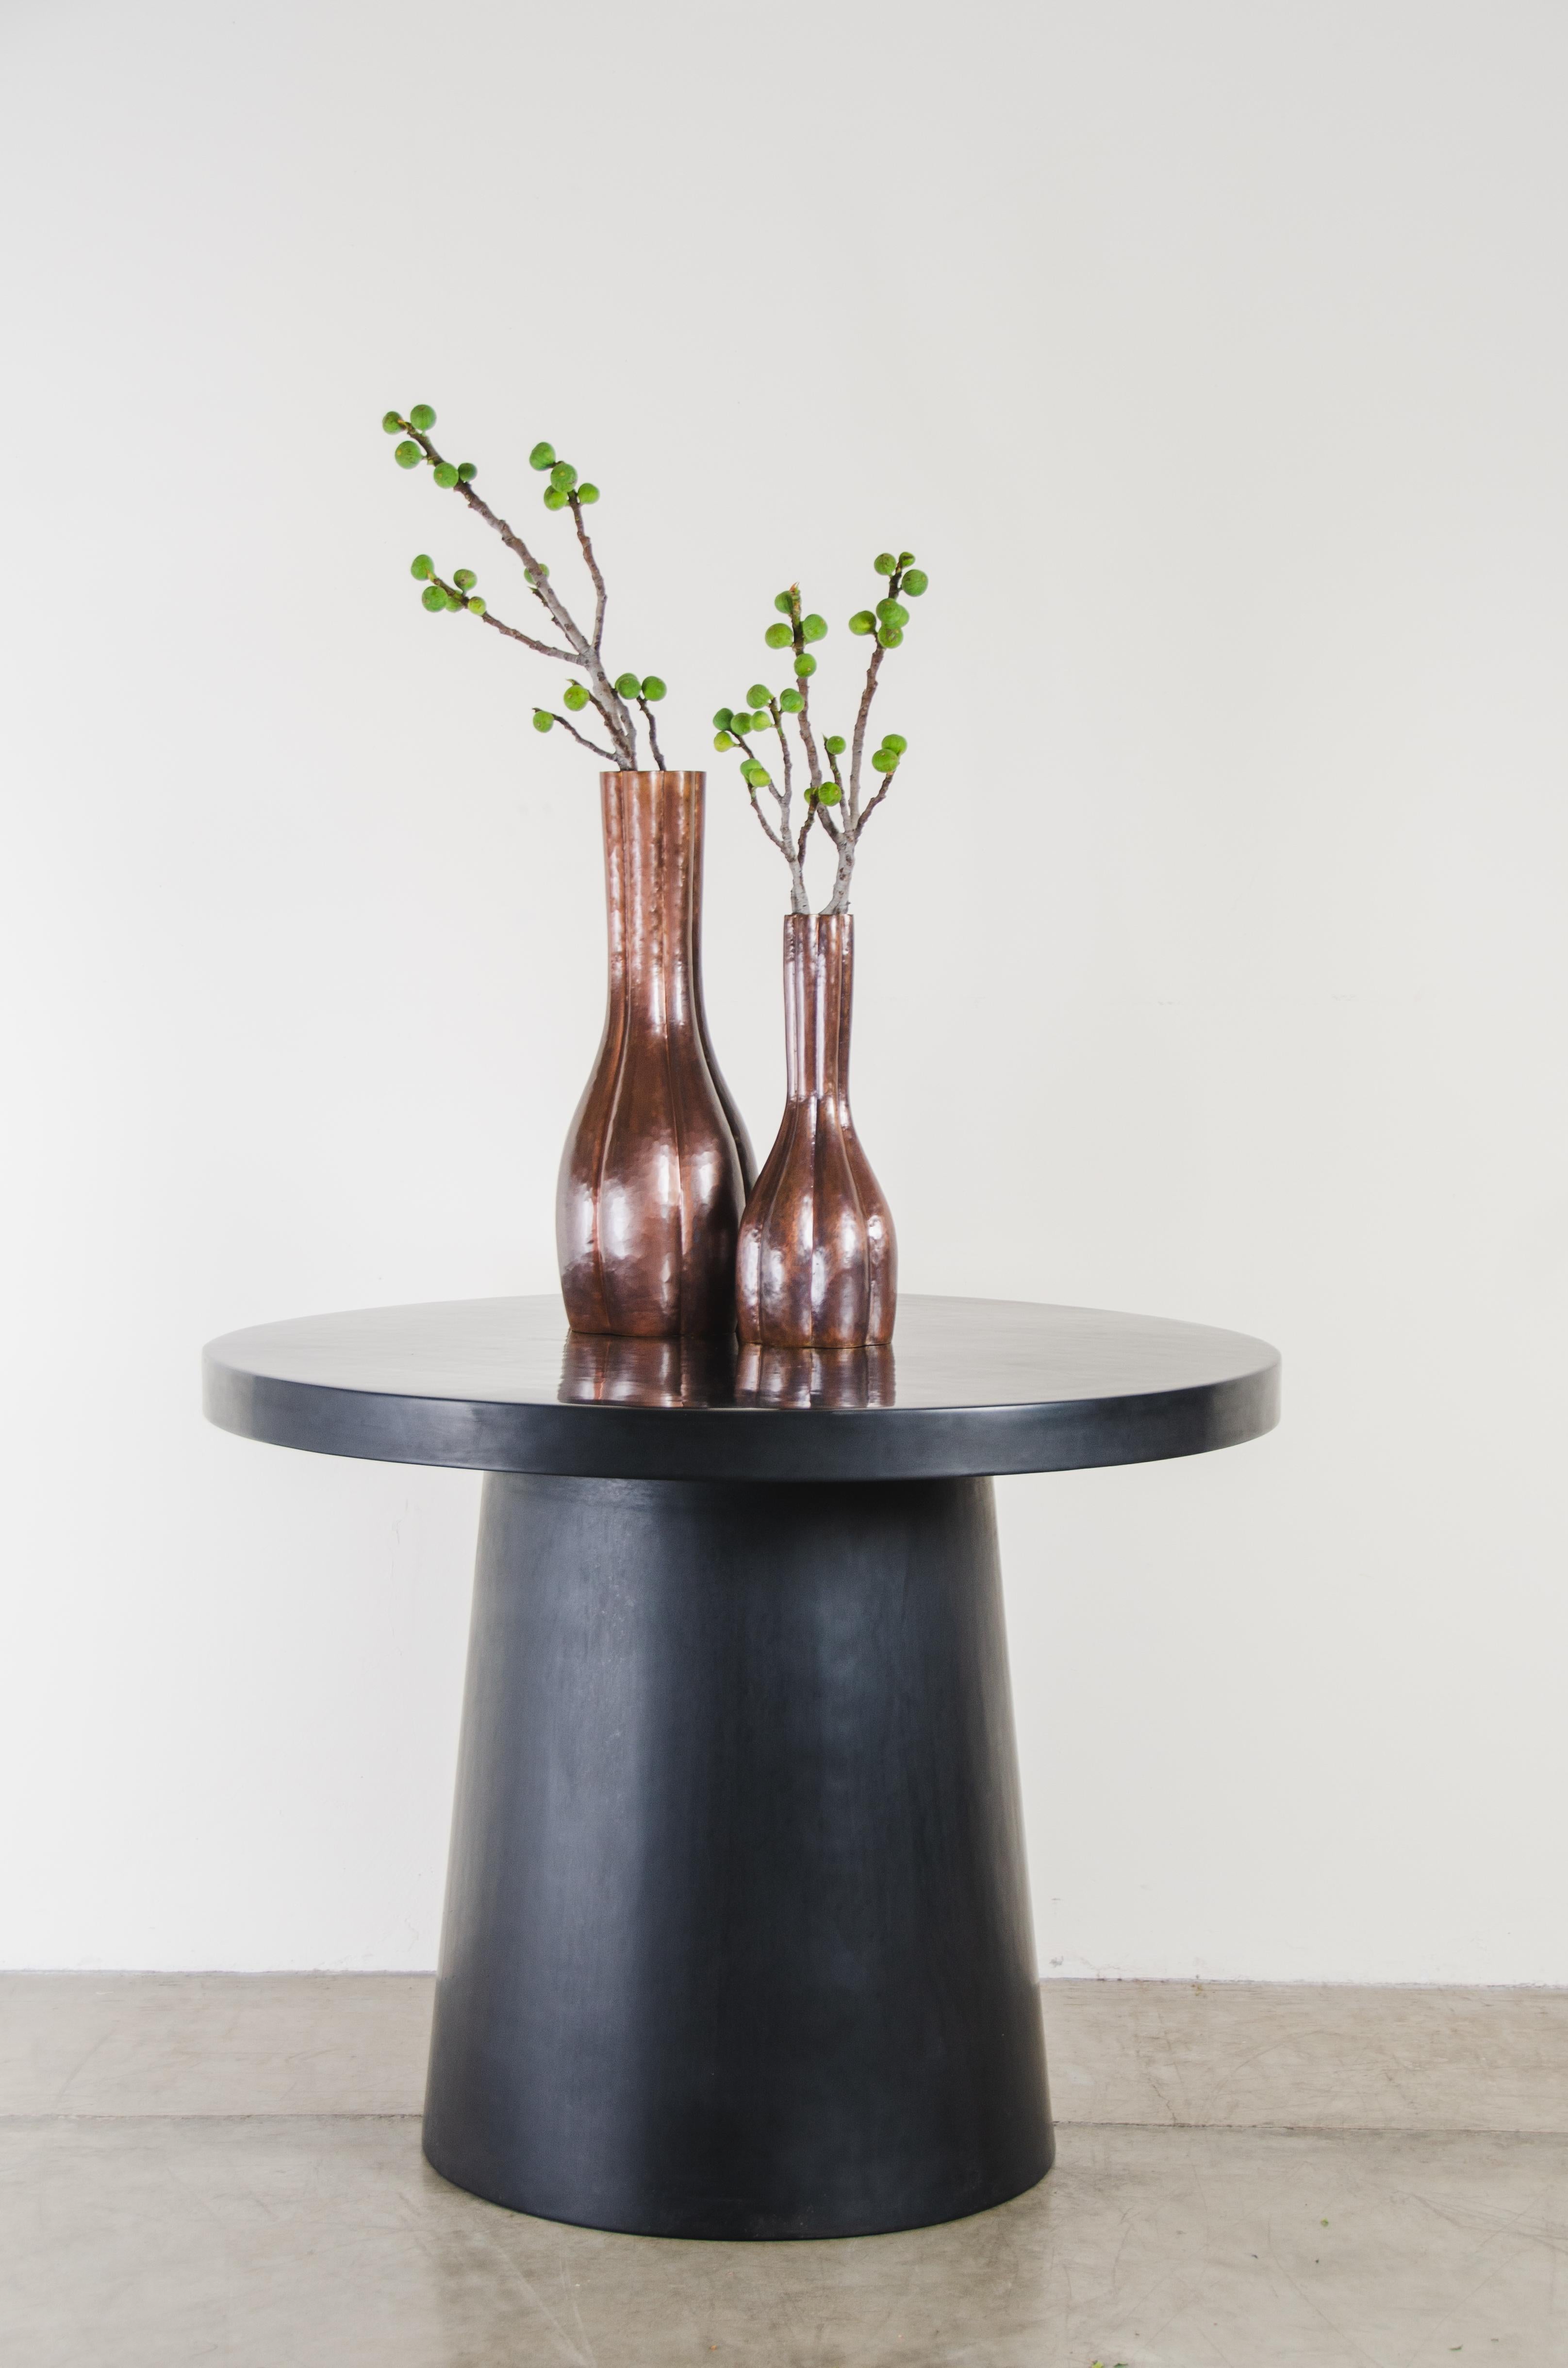 Full Moon Table, Black Lacquer by Robert Kuo, Handmade, Limited Edition 1